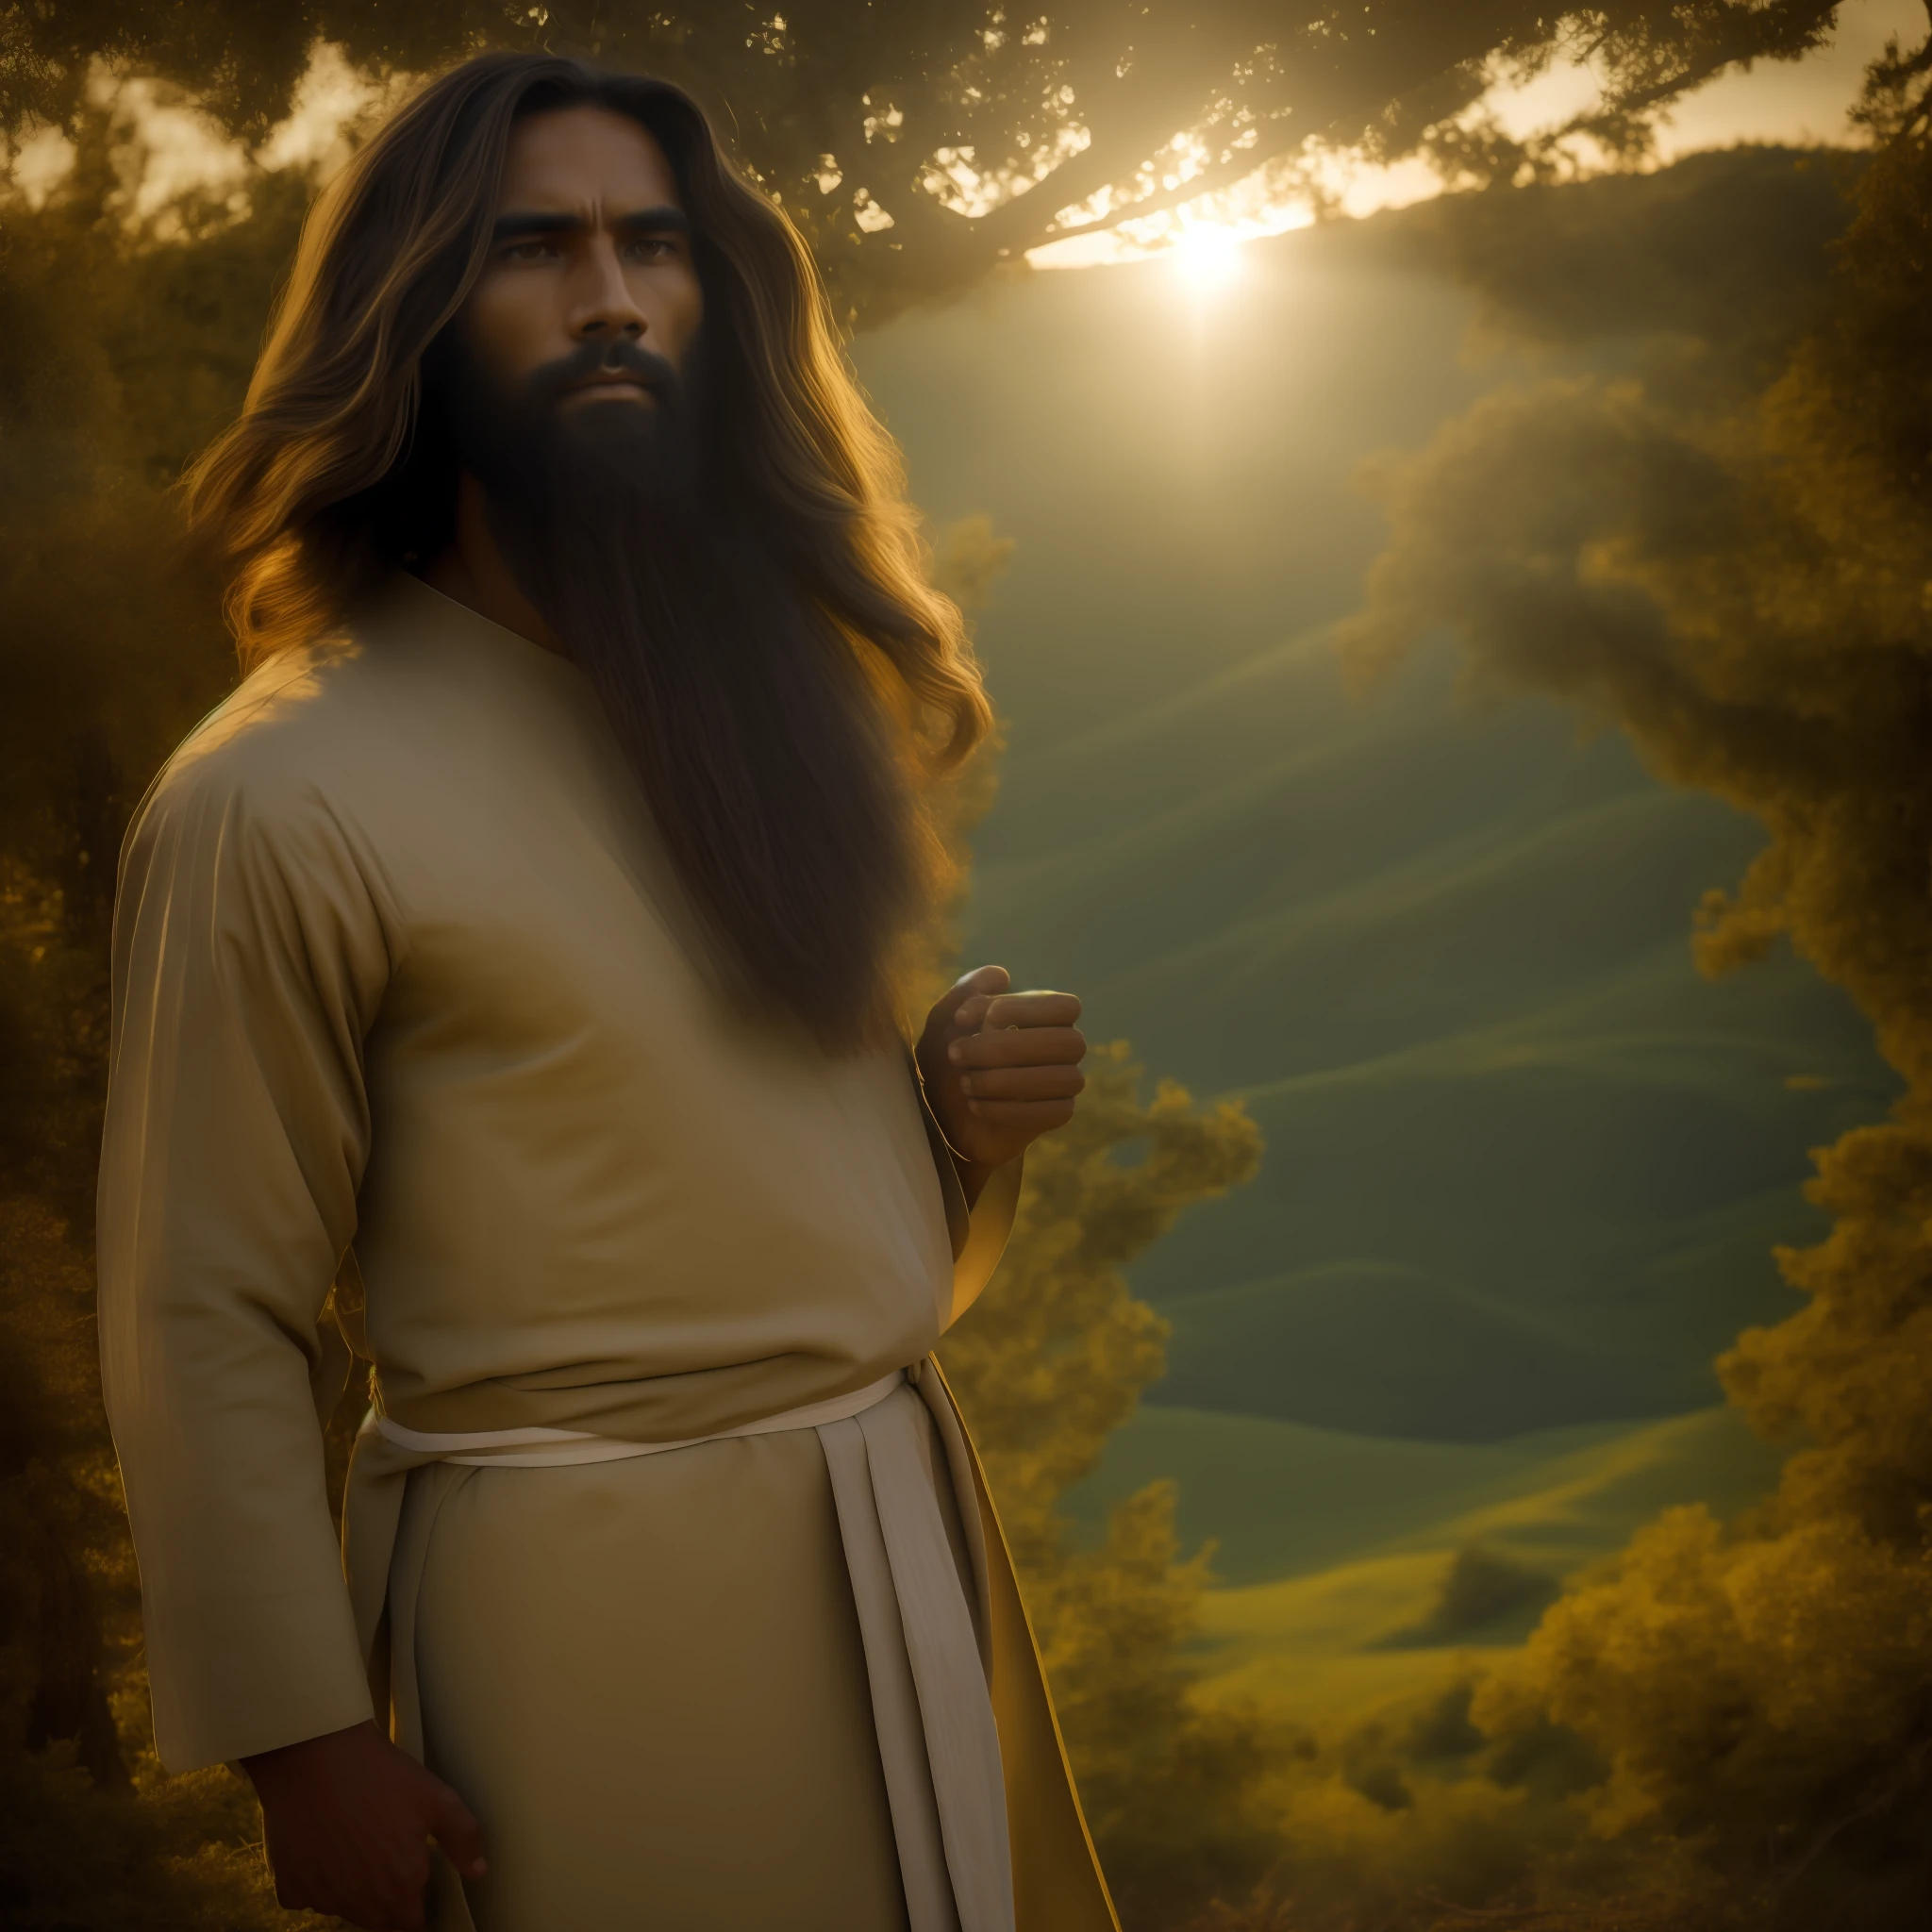 In the image, we see Jesus Christ portrayed in rich detail in a scene that harkens back to his time. He is dressed in a long, simple tunic, made of textured fabric and in earthy tones. His hair and beard are long and slightly wavy, demonstrating his masculinity and wisdom.

His eyes are deep and compassionate, reflecting a divine serenity. Jesus' gaze conveys unconditional love and compassion for all human beings.

In His hands, He holds a carved wooden staff, symbolizing His role as shepherd of the flock. Behind him, a verdant field stretches out, dotted with wildflowers and natural plants that represent God's creation.

Around Jesus, there are people from different backgrounds and social conditions. Some are hunched over, seeking comfort and guidance, while others are standing, looking at him with wonder and hope. Their facial expressions vary, showing the diversity of emotions that Jesus awakens in each one.

Sunlight shines softly over the scene, creating a serene and welcoming atmosphere. In the background, hills and hills can be seen, which evoke the landscape of the region in which Jesus lived.